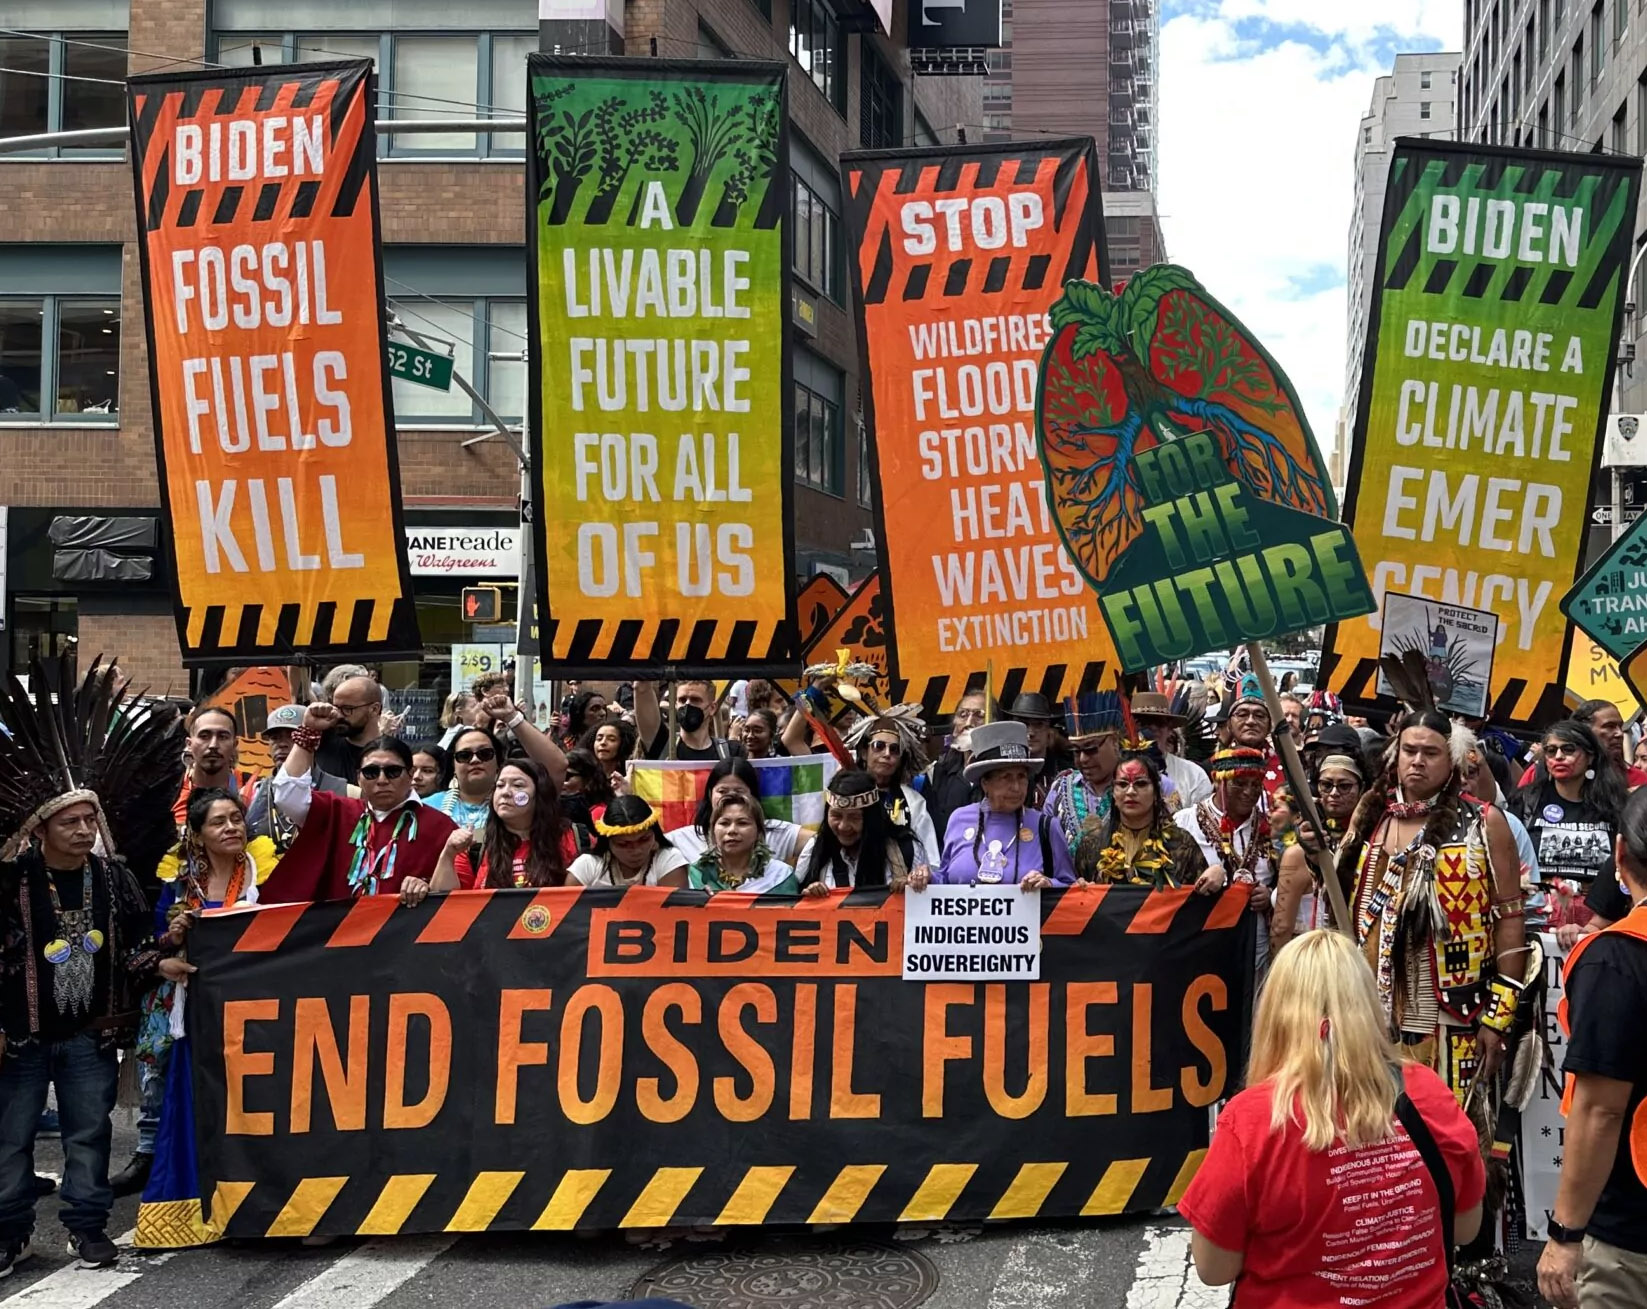 People marching to End Fossil Fuels in New York City